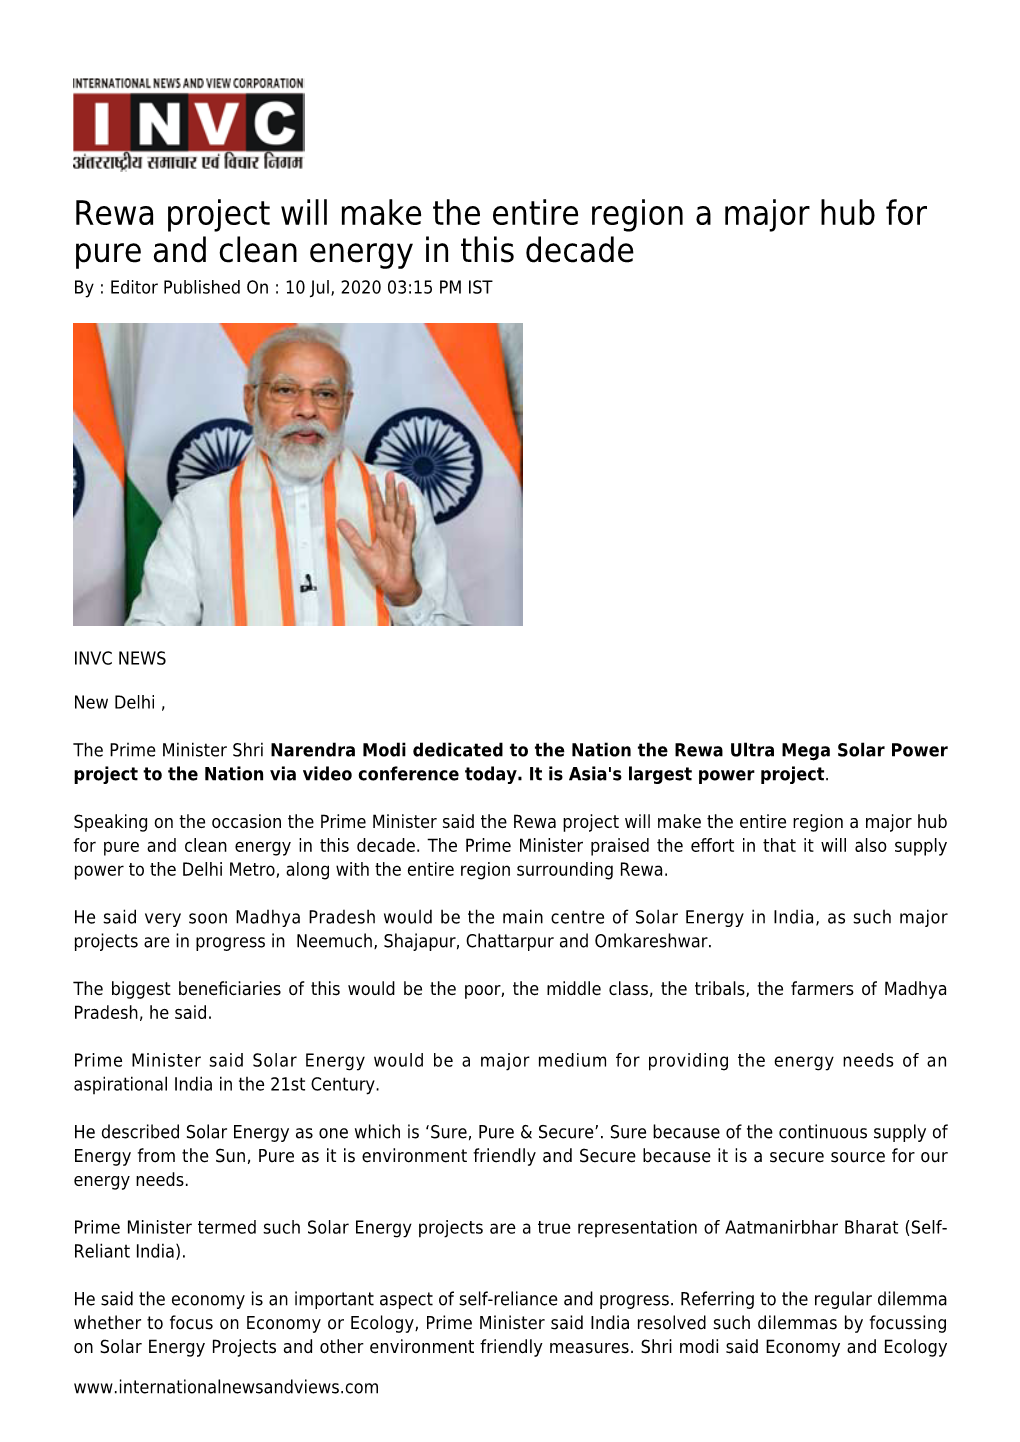 Rewa Project Will Make the Entire Region a Major Hub for Pure and Clean Energy in This Decade by : Editor Published on : 10 Jul, 2020 03:15 PM IST